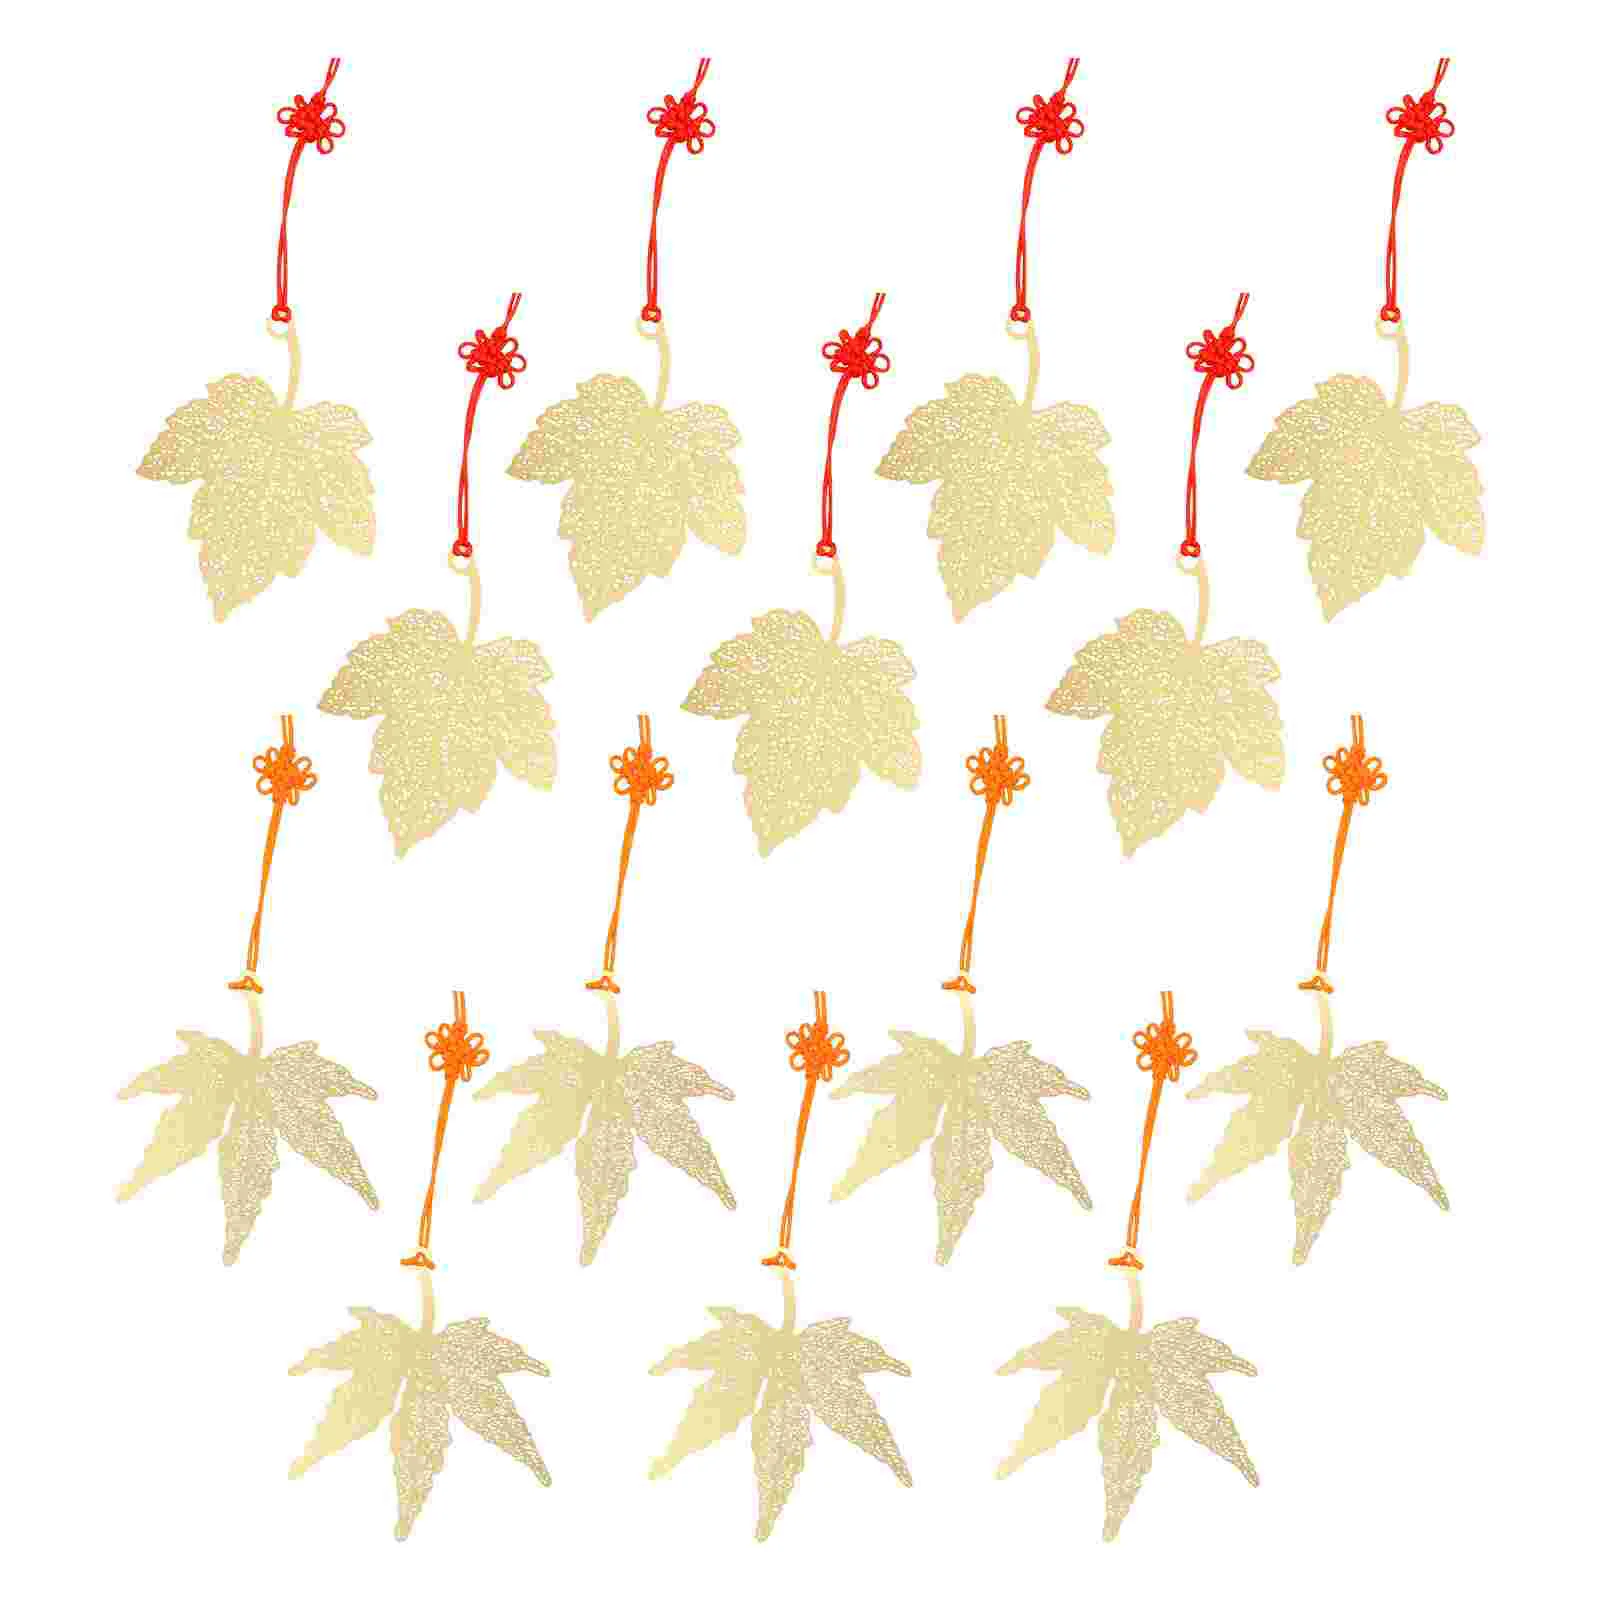 

14pcs Fall Leaves Maple Leaf Ornament Xmas Tree Adornment Thanksgiving Ornament Party Decor Supplies Hanging Christmas Adornment